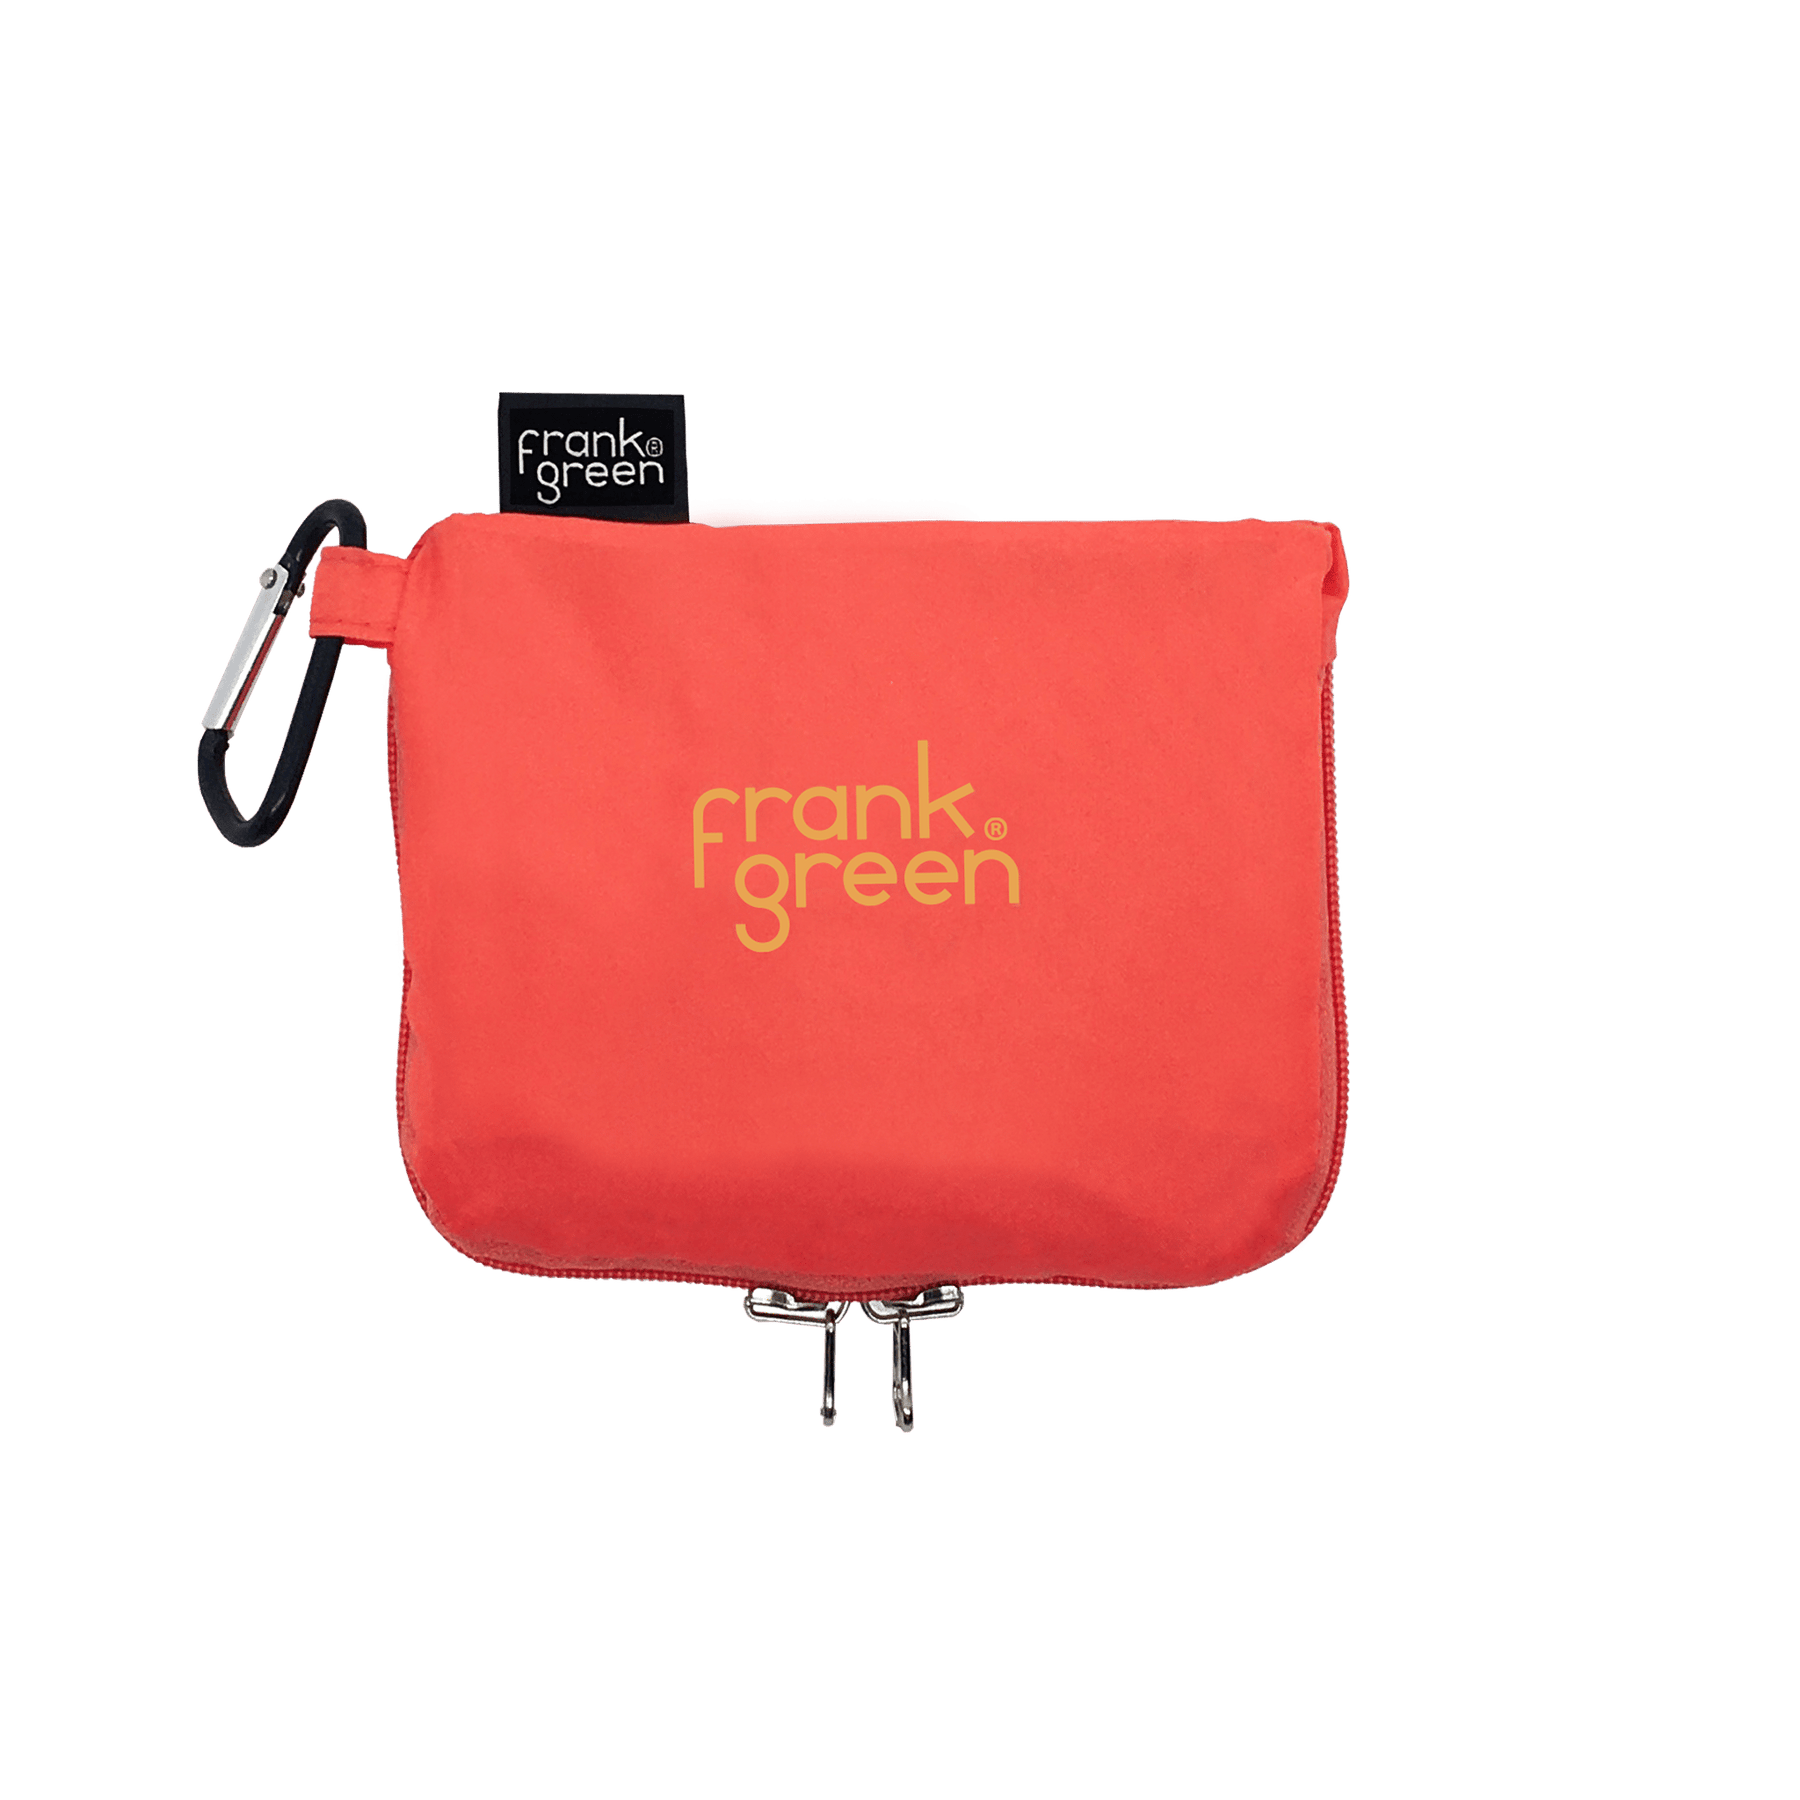 Frank Green Living Coral Ultimate Reusable 3-in-1 Bag - Reusable Tote Bag, Backpack, Shopping Bag, Multiple Colors